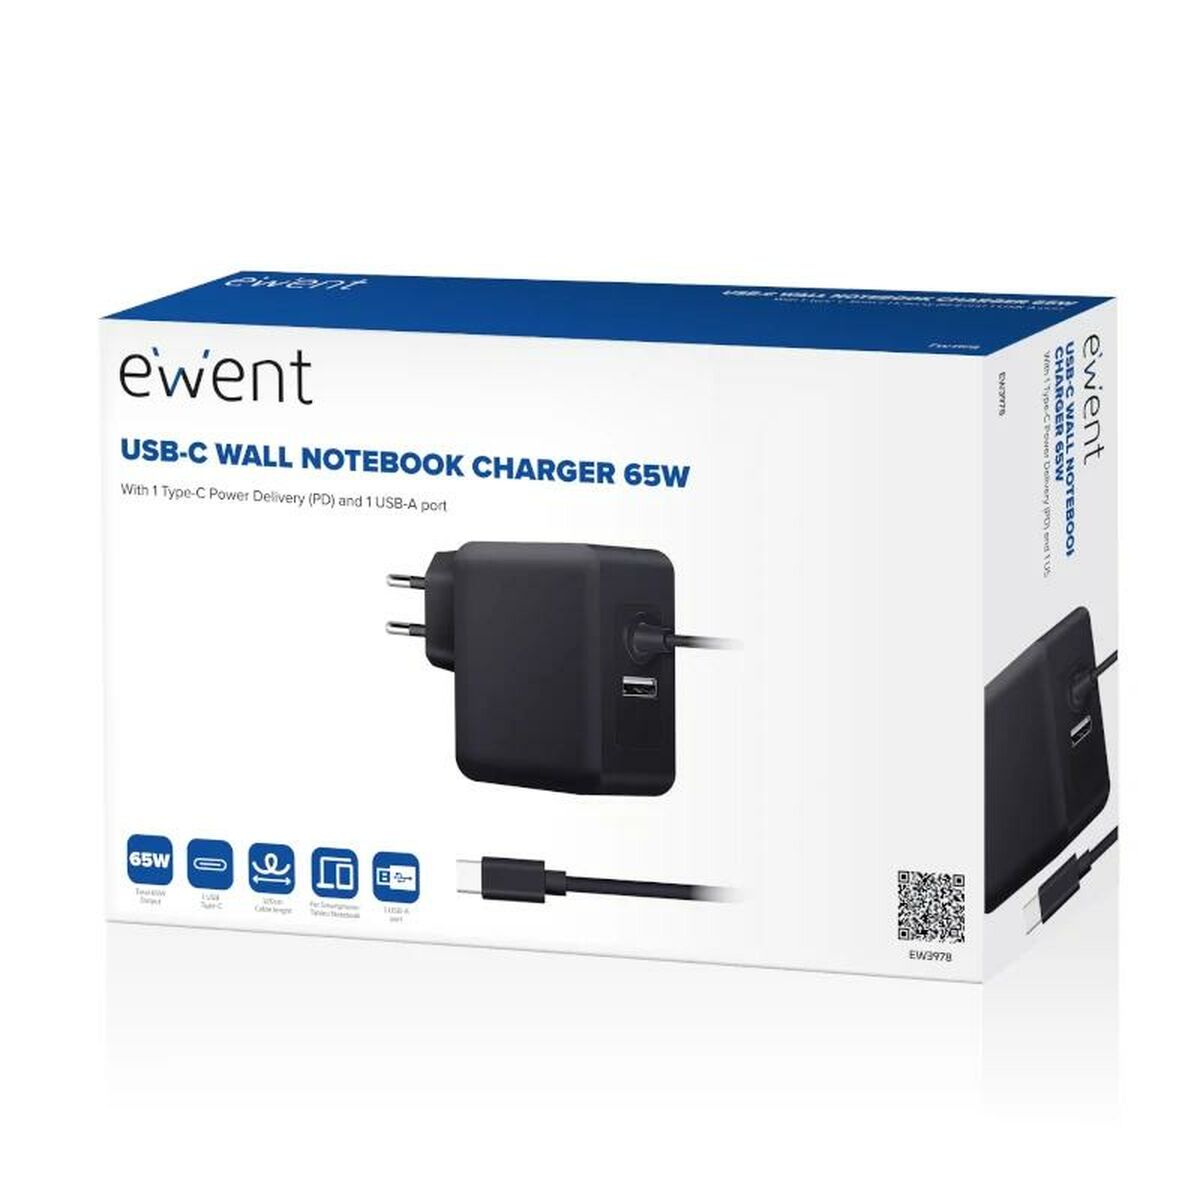 Laptop Charger Ewent EW3979